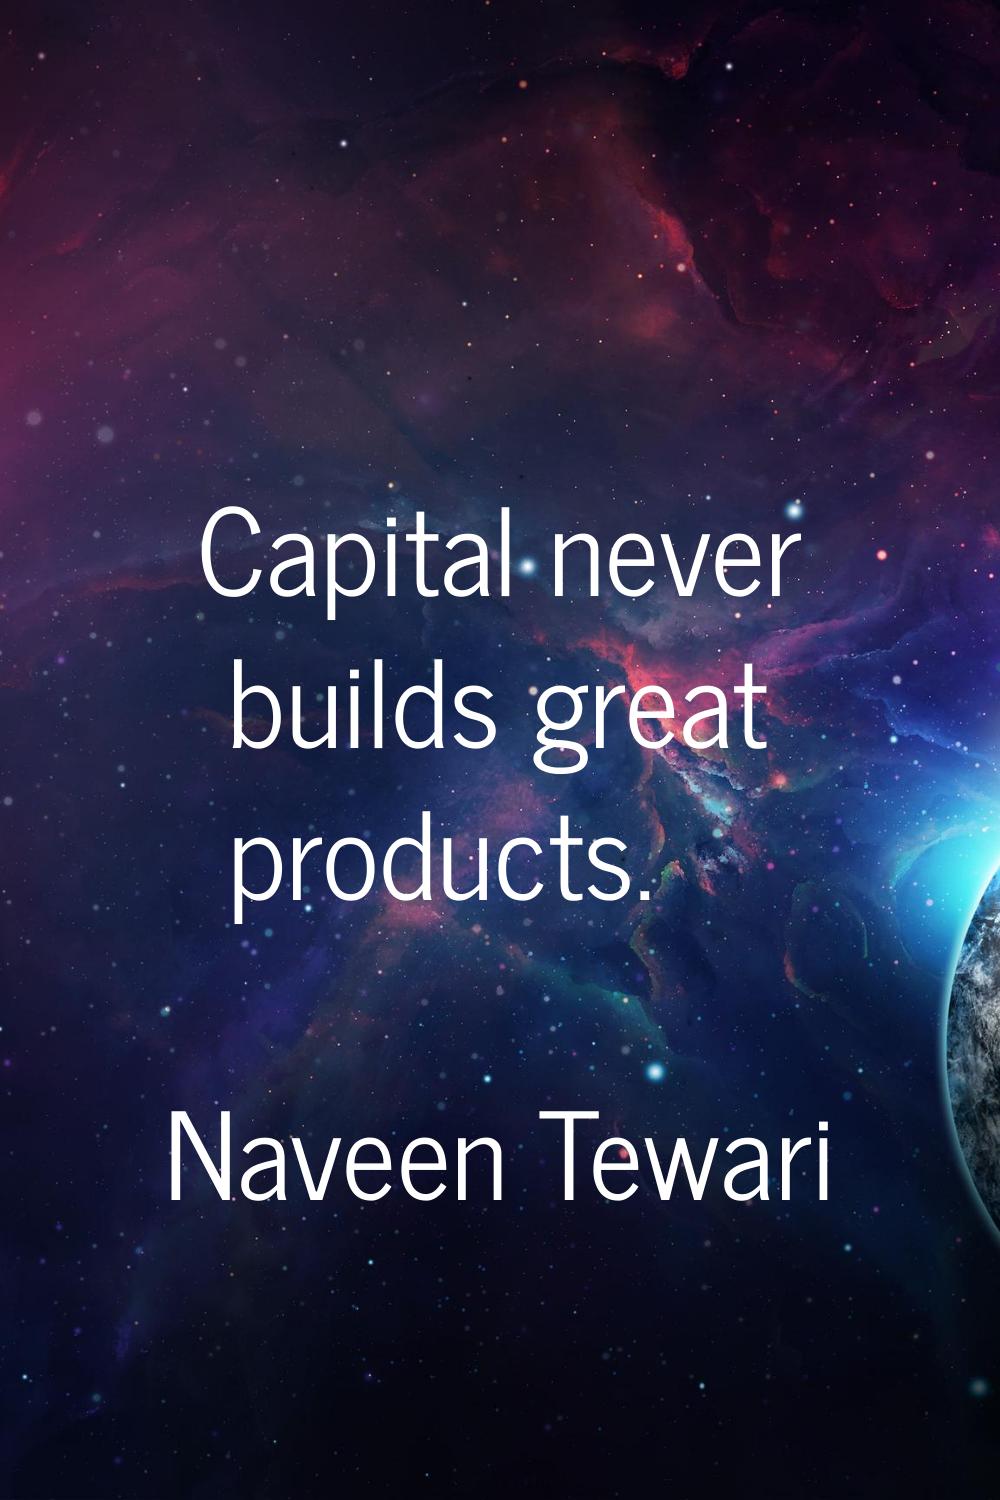 Capital never builds great products.